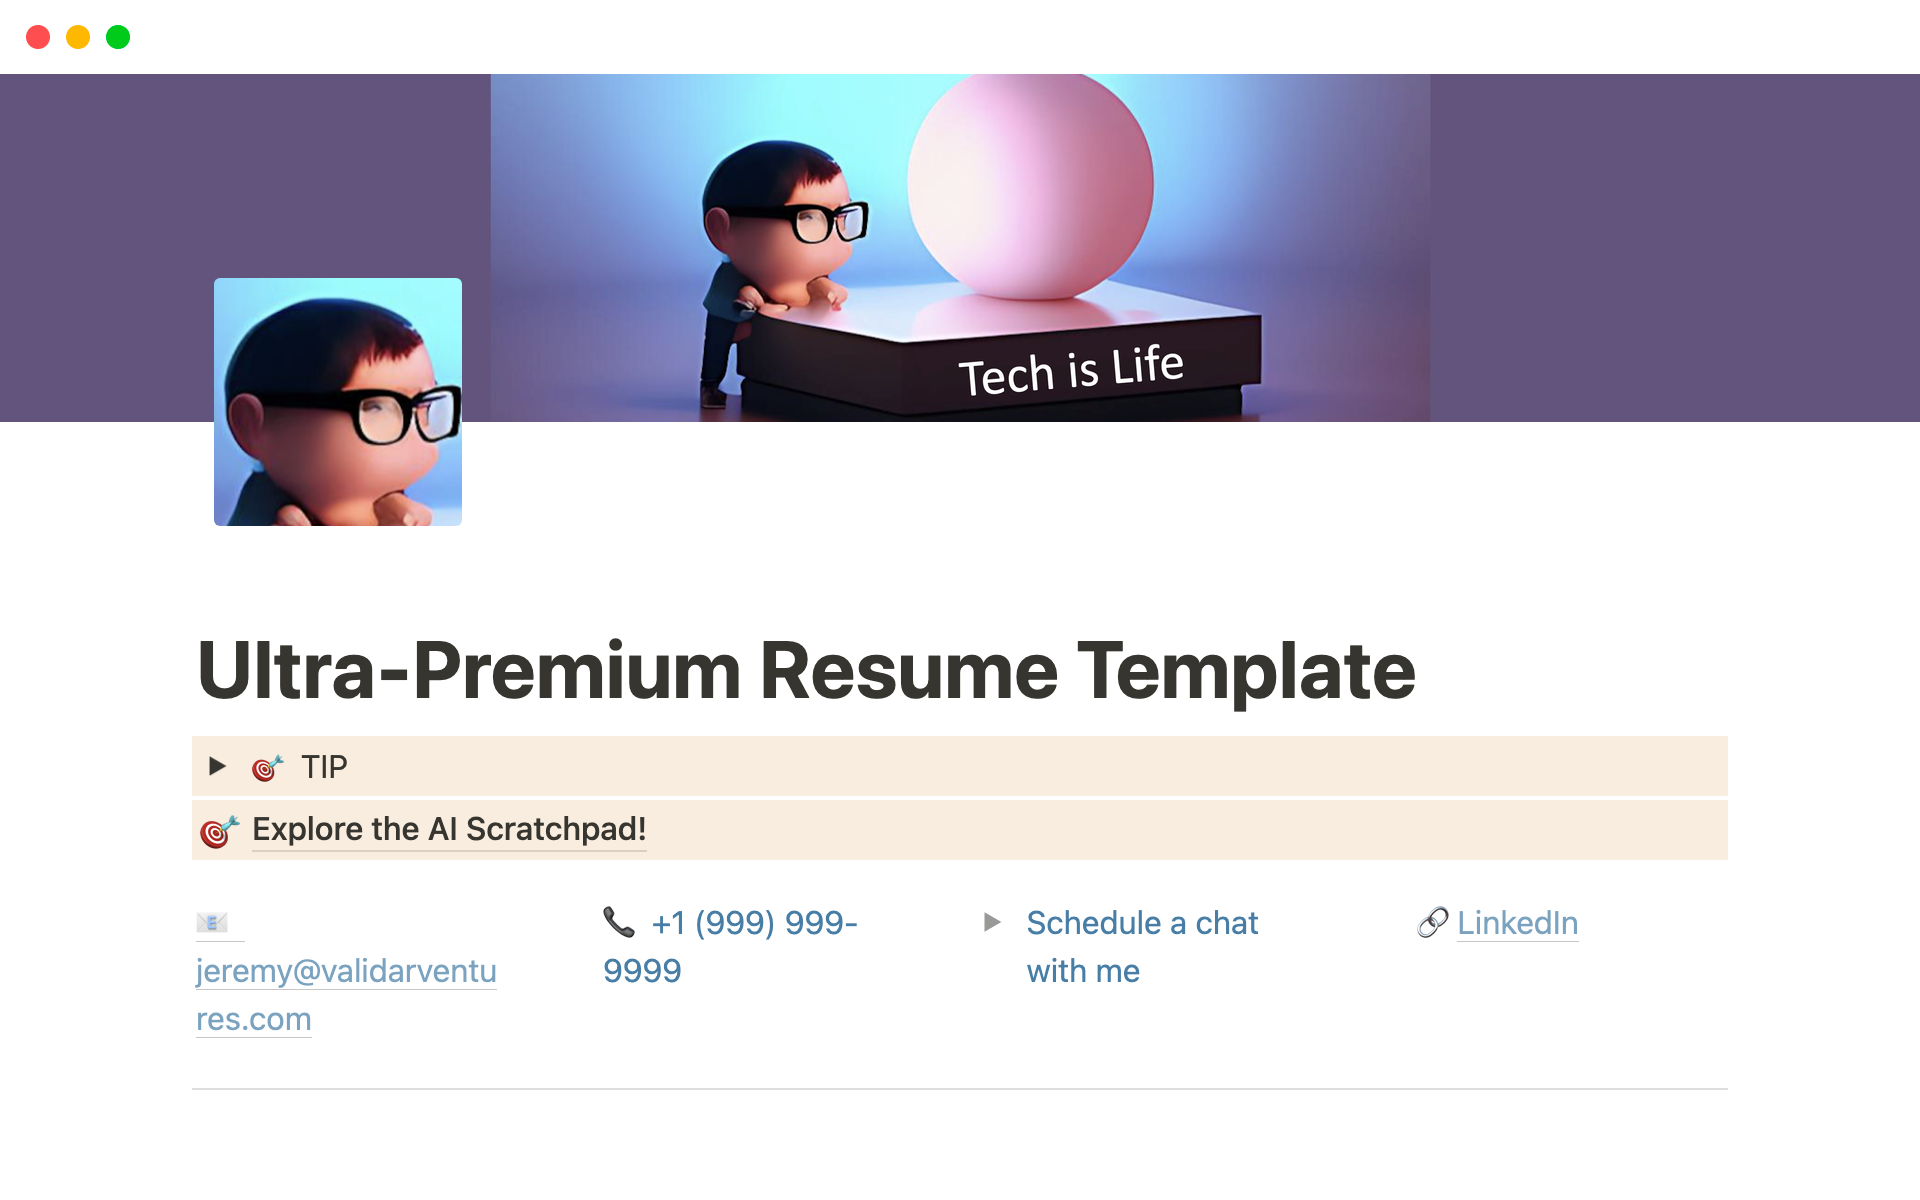 A template preview for Ultra-Premium Resume